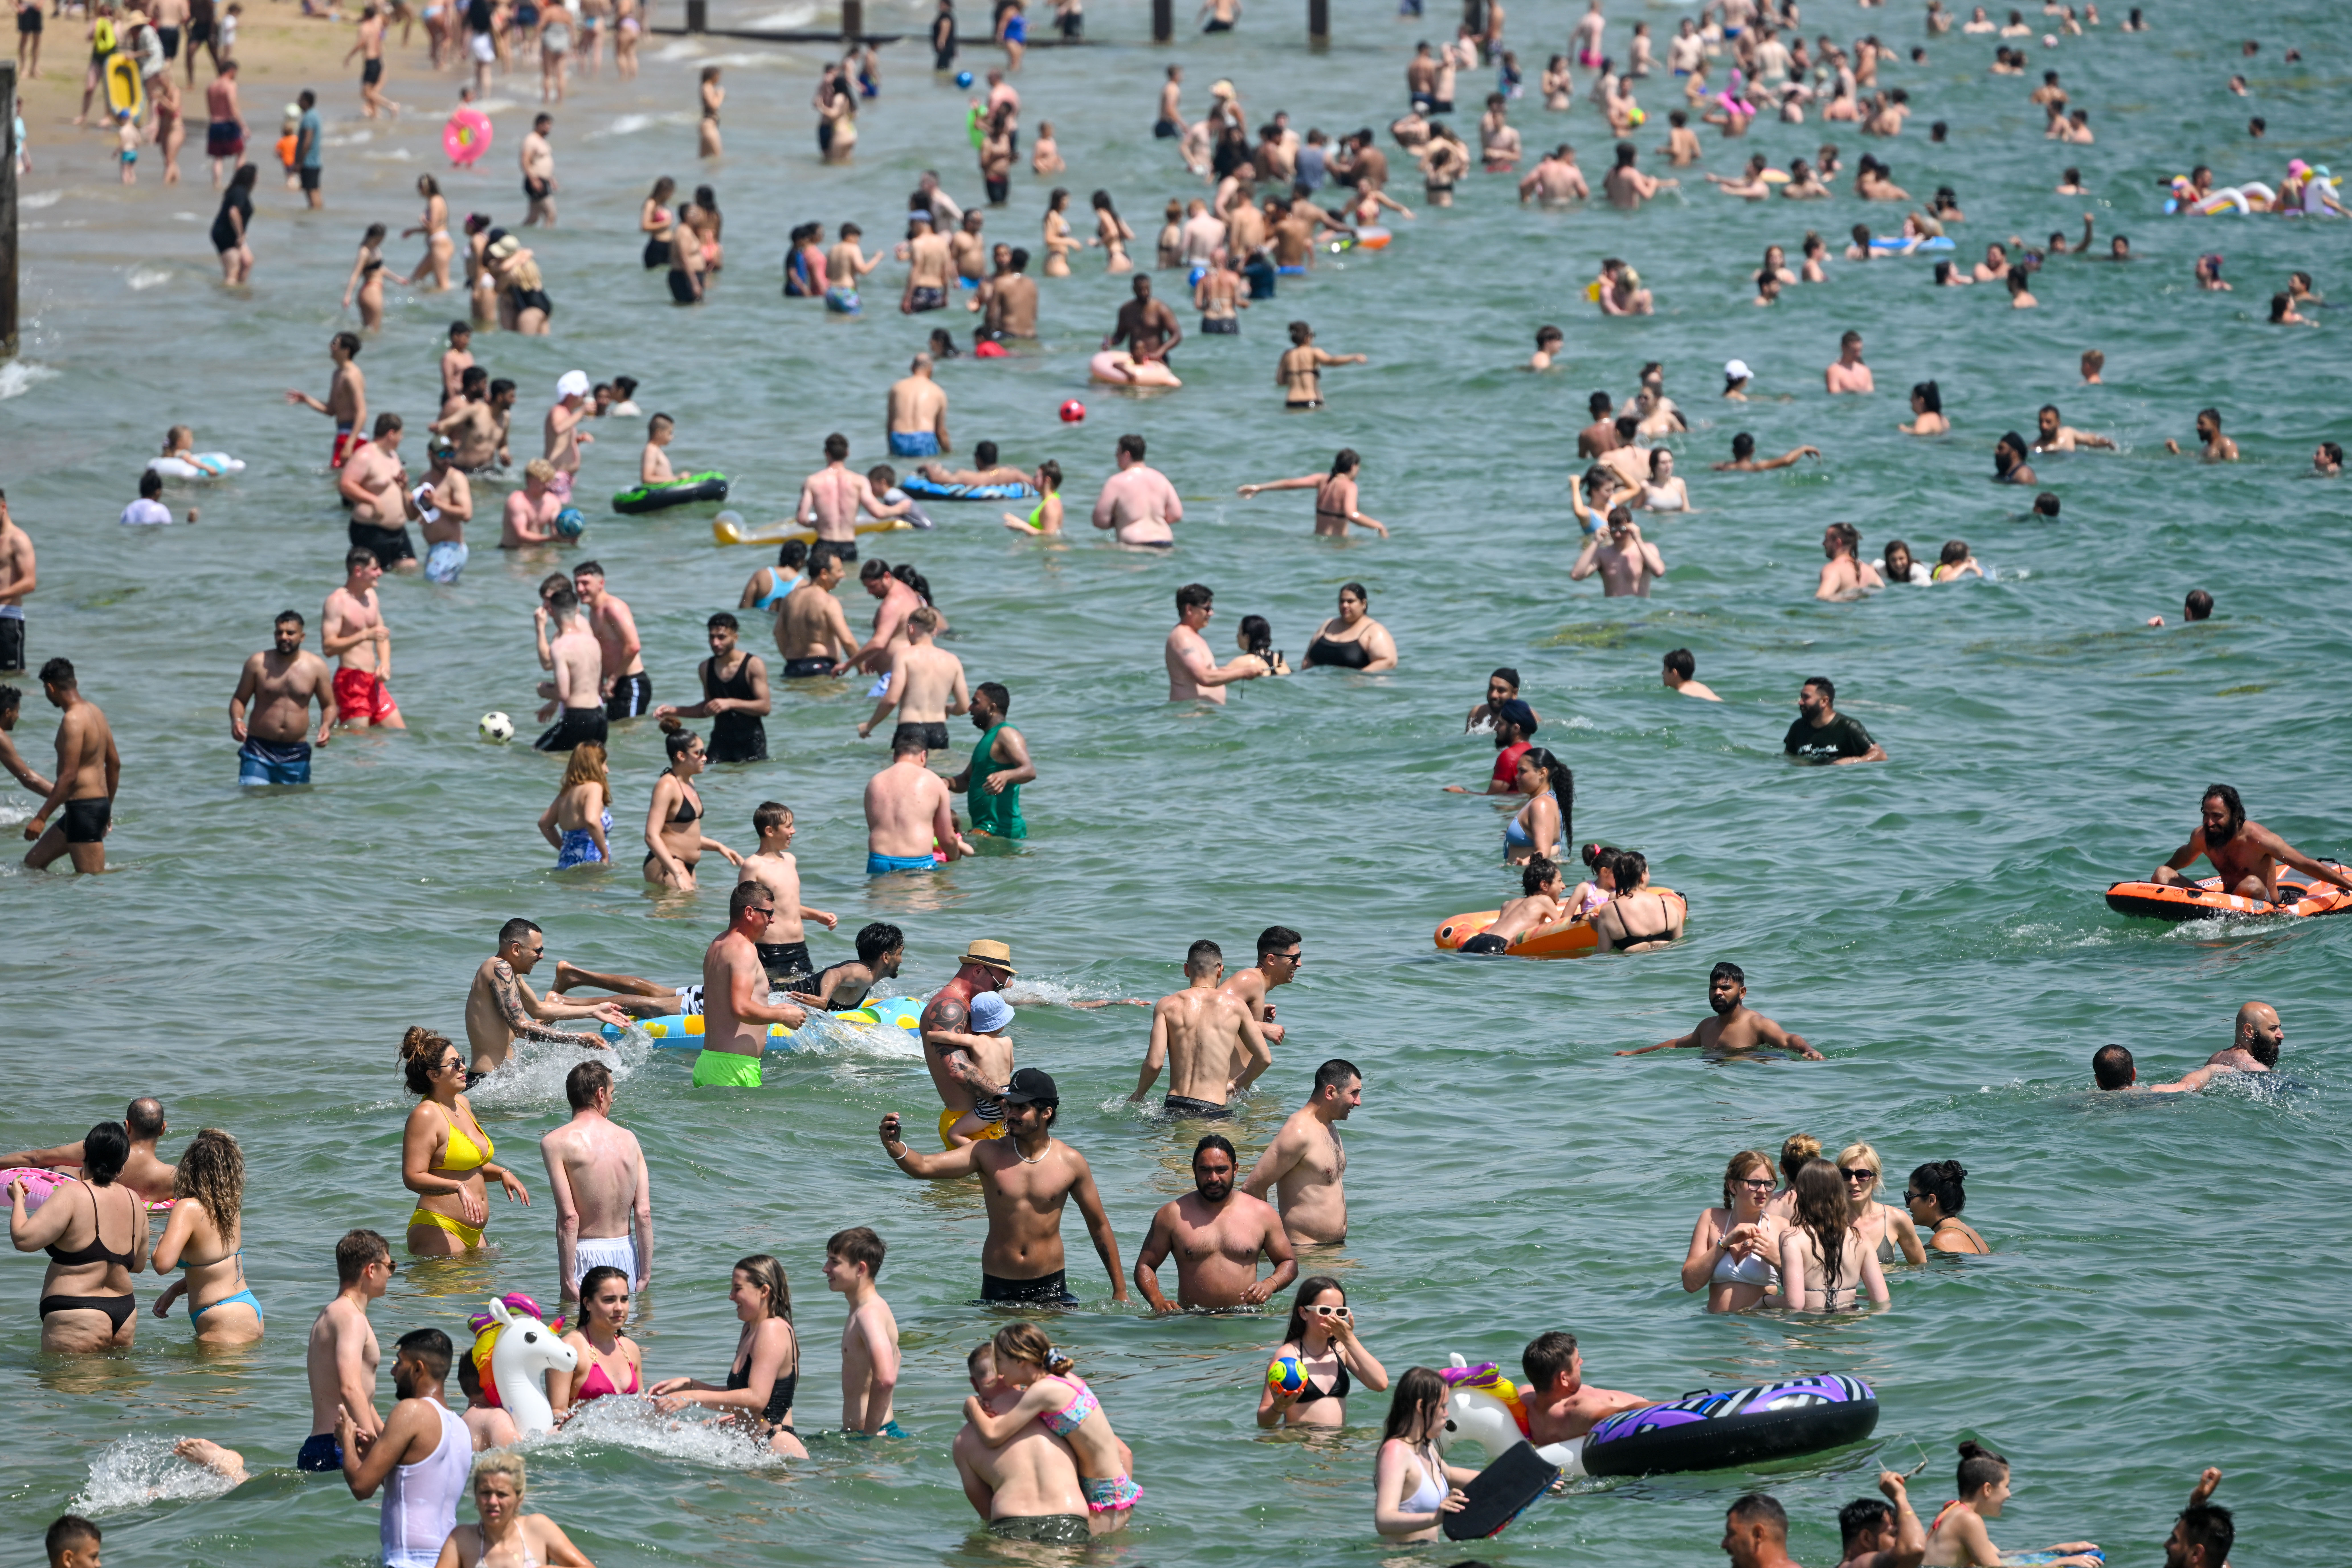 Crowds enjoy the hot weather on the beach